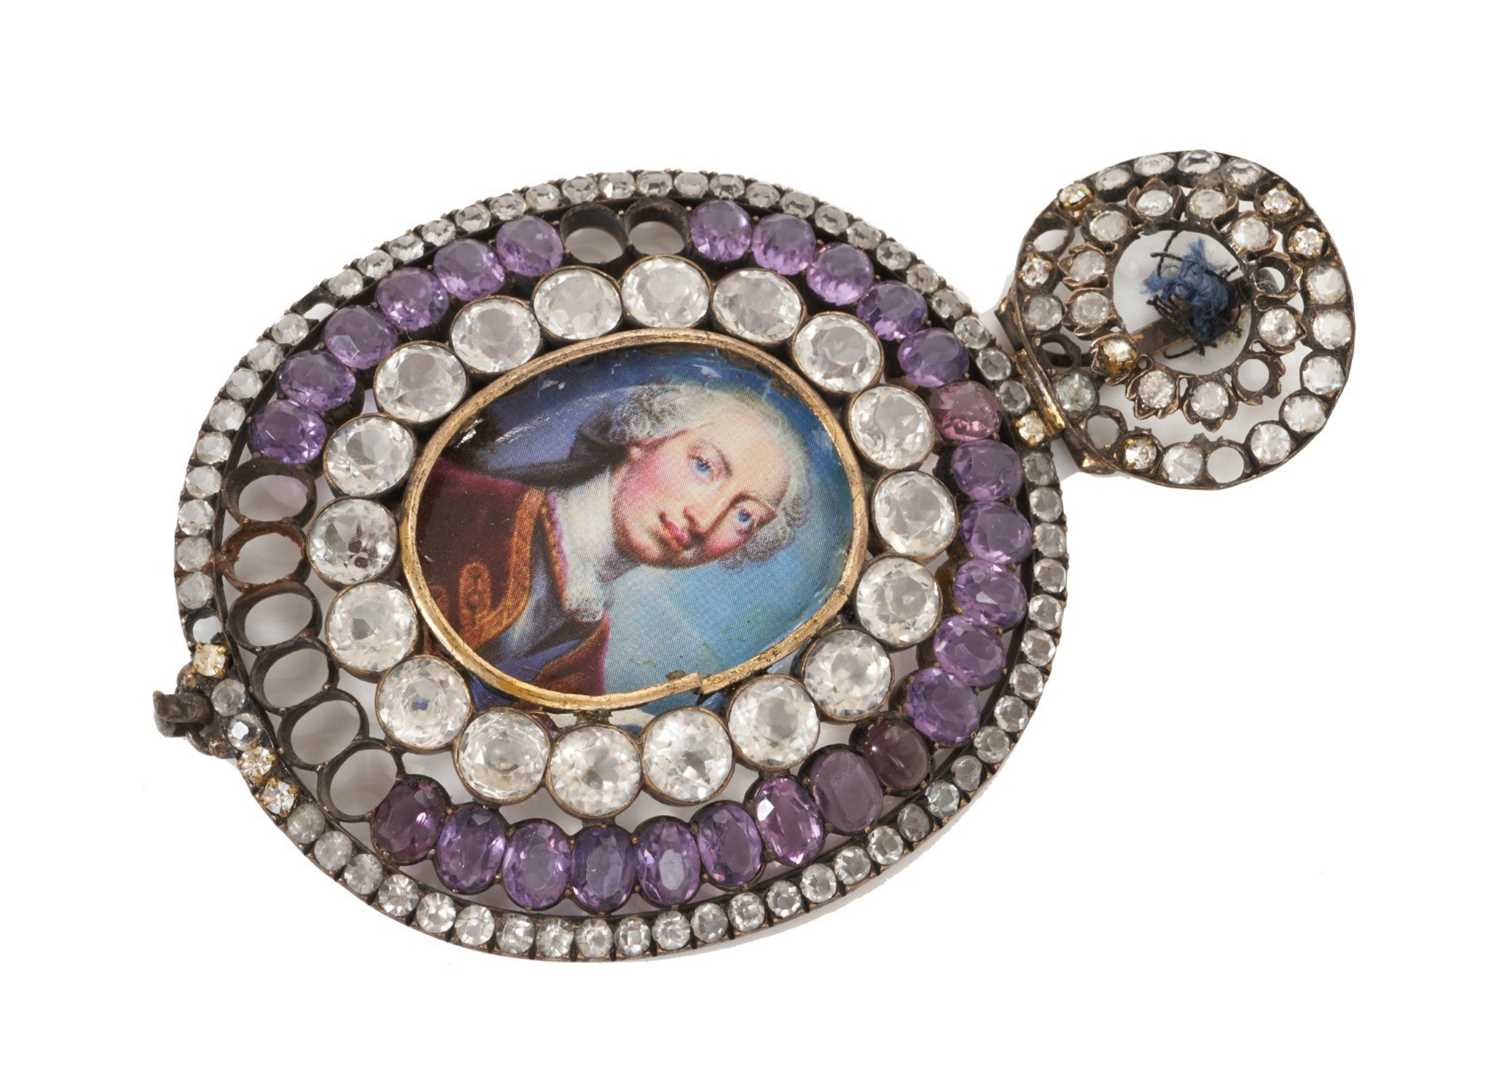 Lot 6 - Formerly the property of Sir Cecil Beaton CBE, 19th century paste set Royal Family Order sash badge of oval form set with purple and white stones with later printed portrait to centre 10.5 cm high...